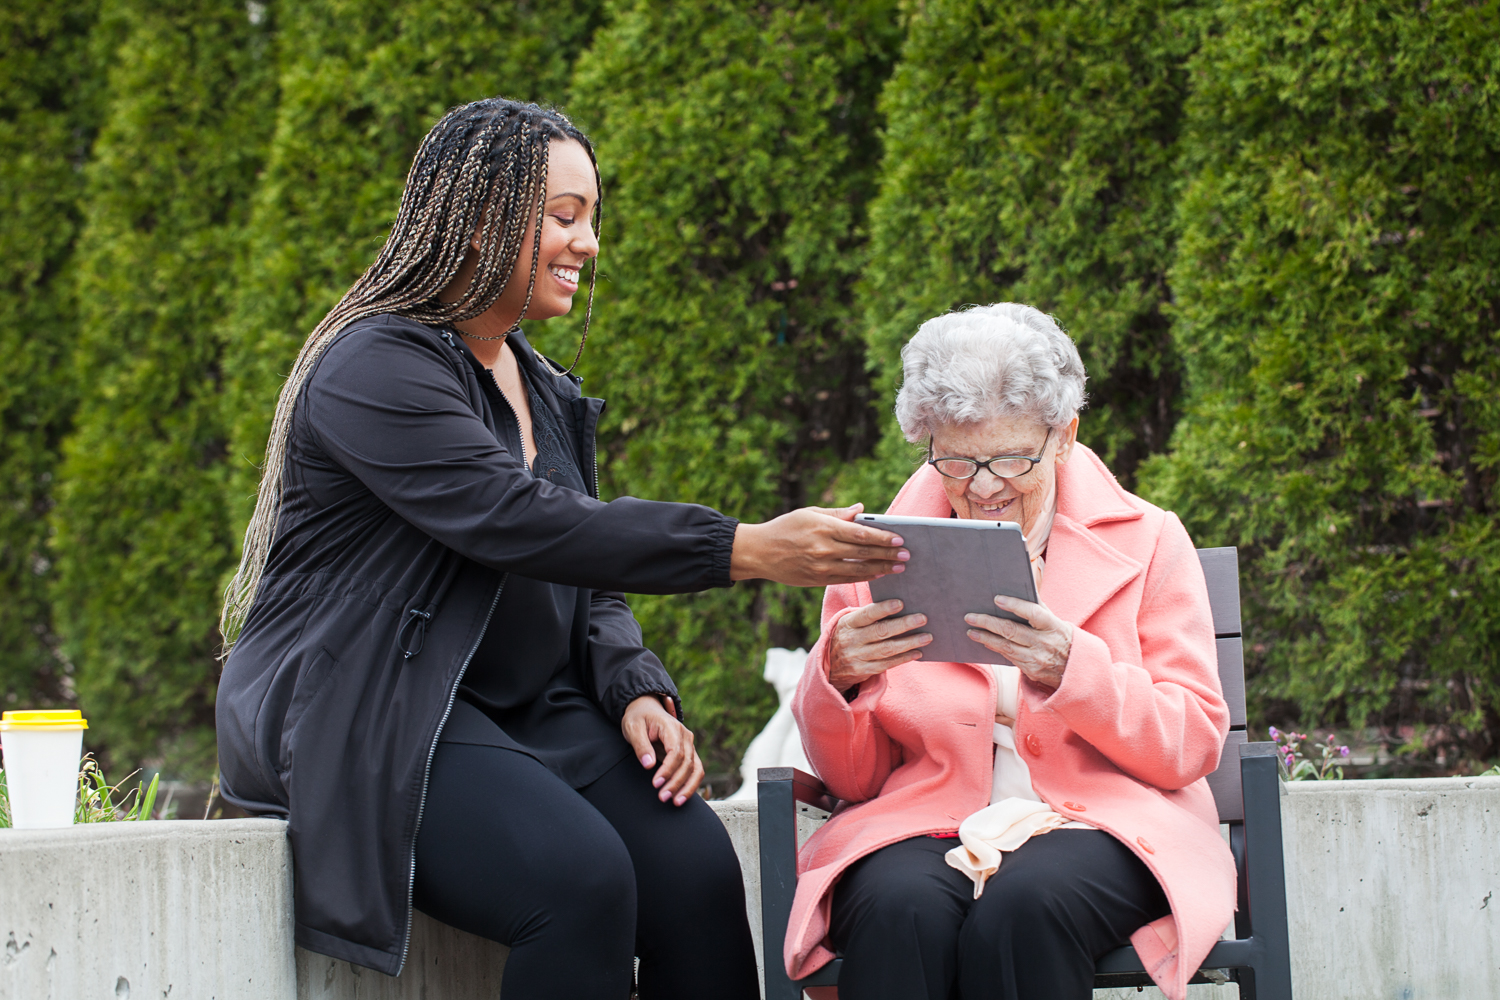 An intervenor hands a tablet to a client with a large print message written on it for them to read.